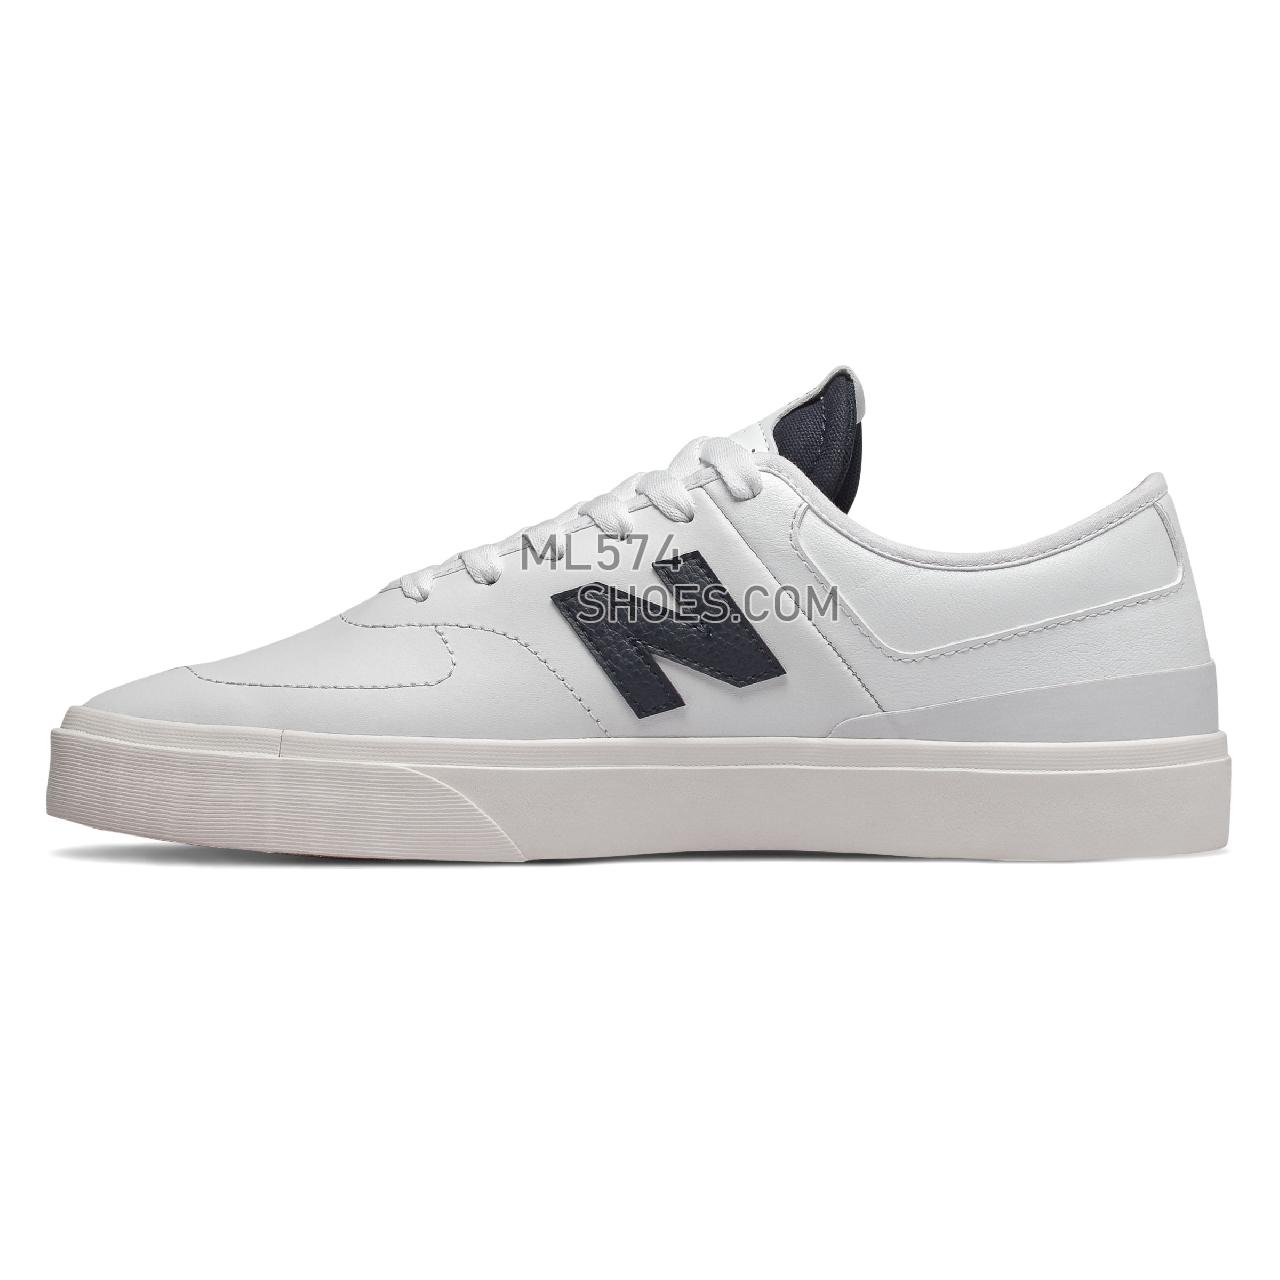 New Balance Numeric 379 - Men's NB Numeric Skate - White with Navy - NM379WWN